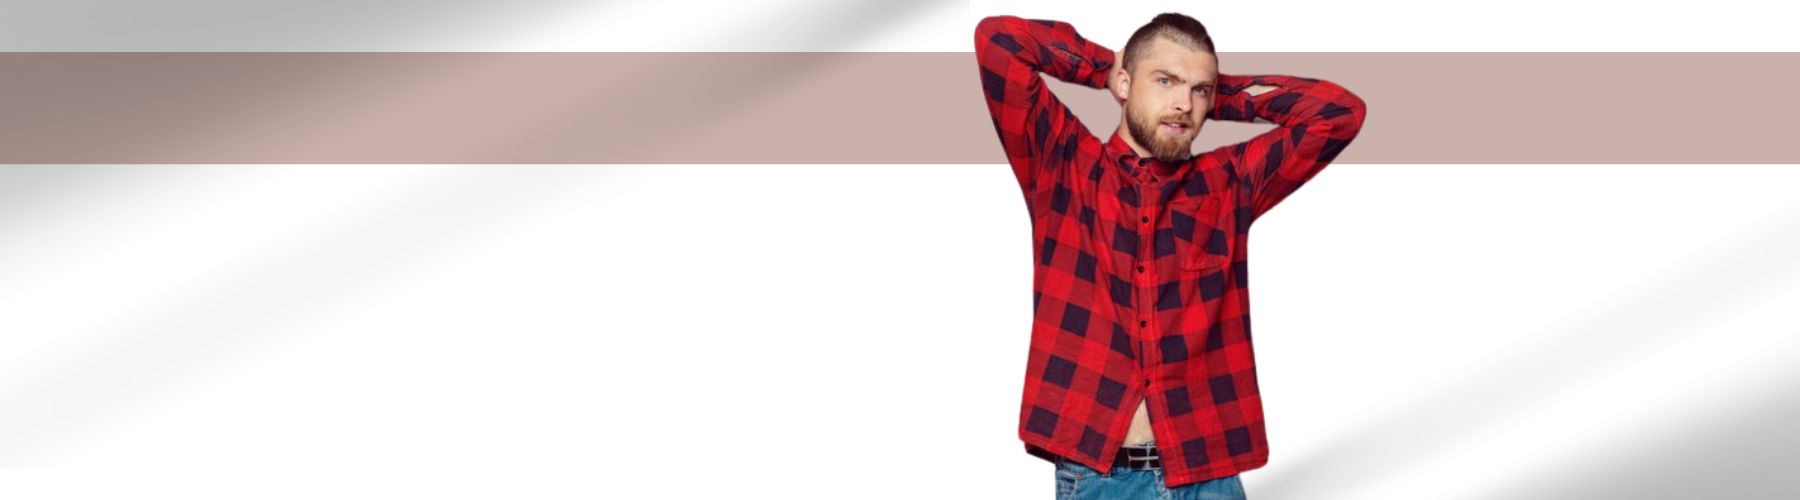 flannel clothing distributor in Australia